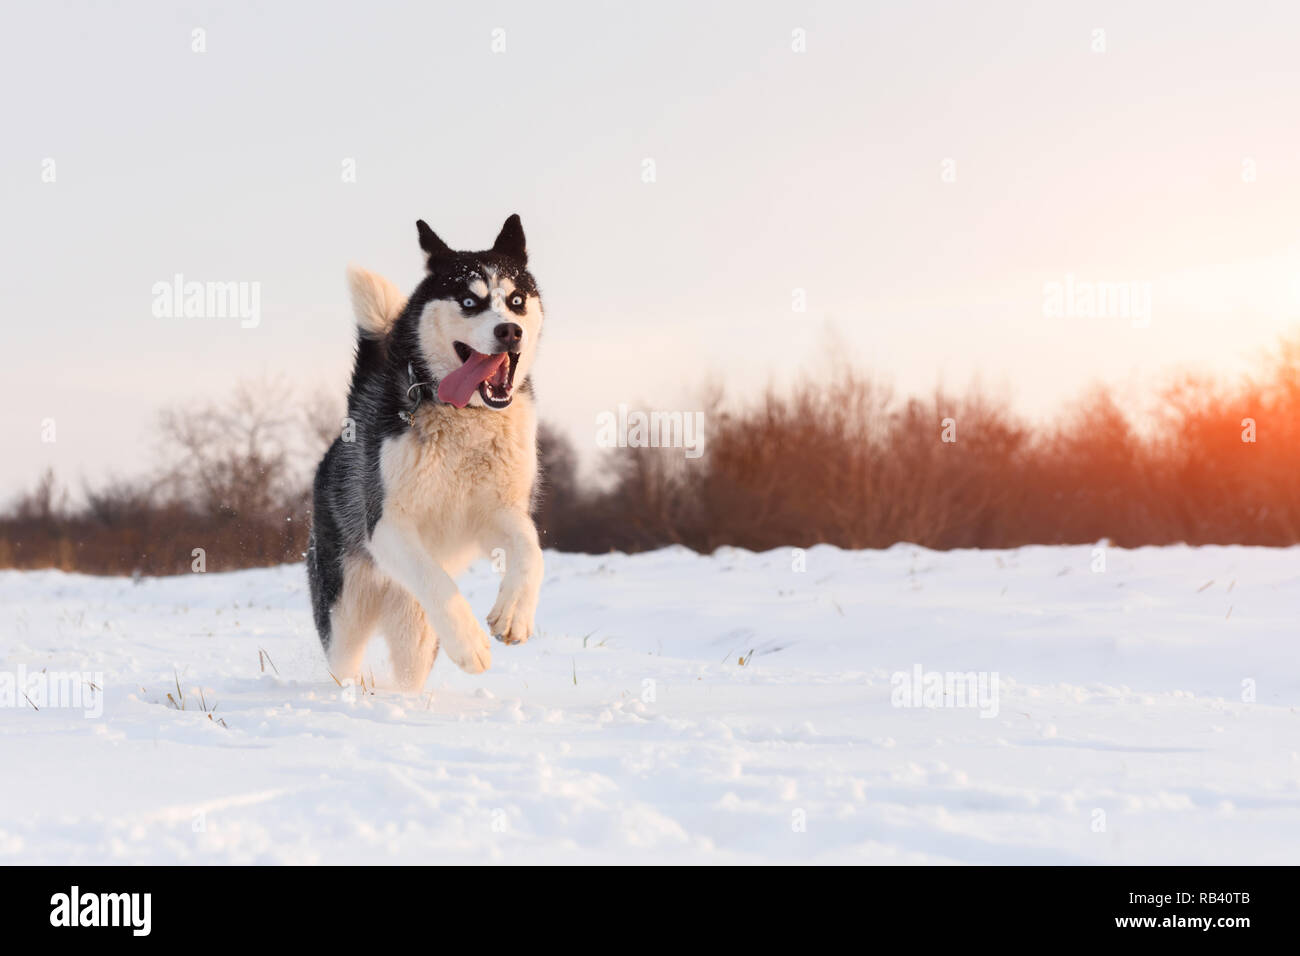 Siberian husky and jack russel terrier dogs playing on winter field. Happy puppys in fluffy snow. Animal photography Stock Photo